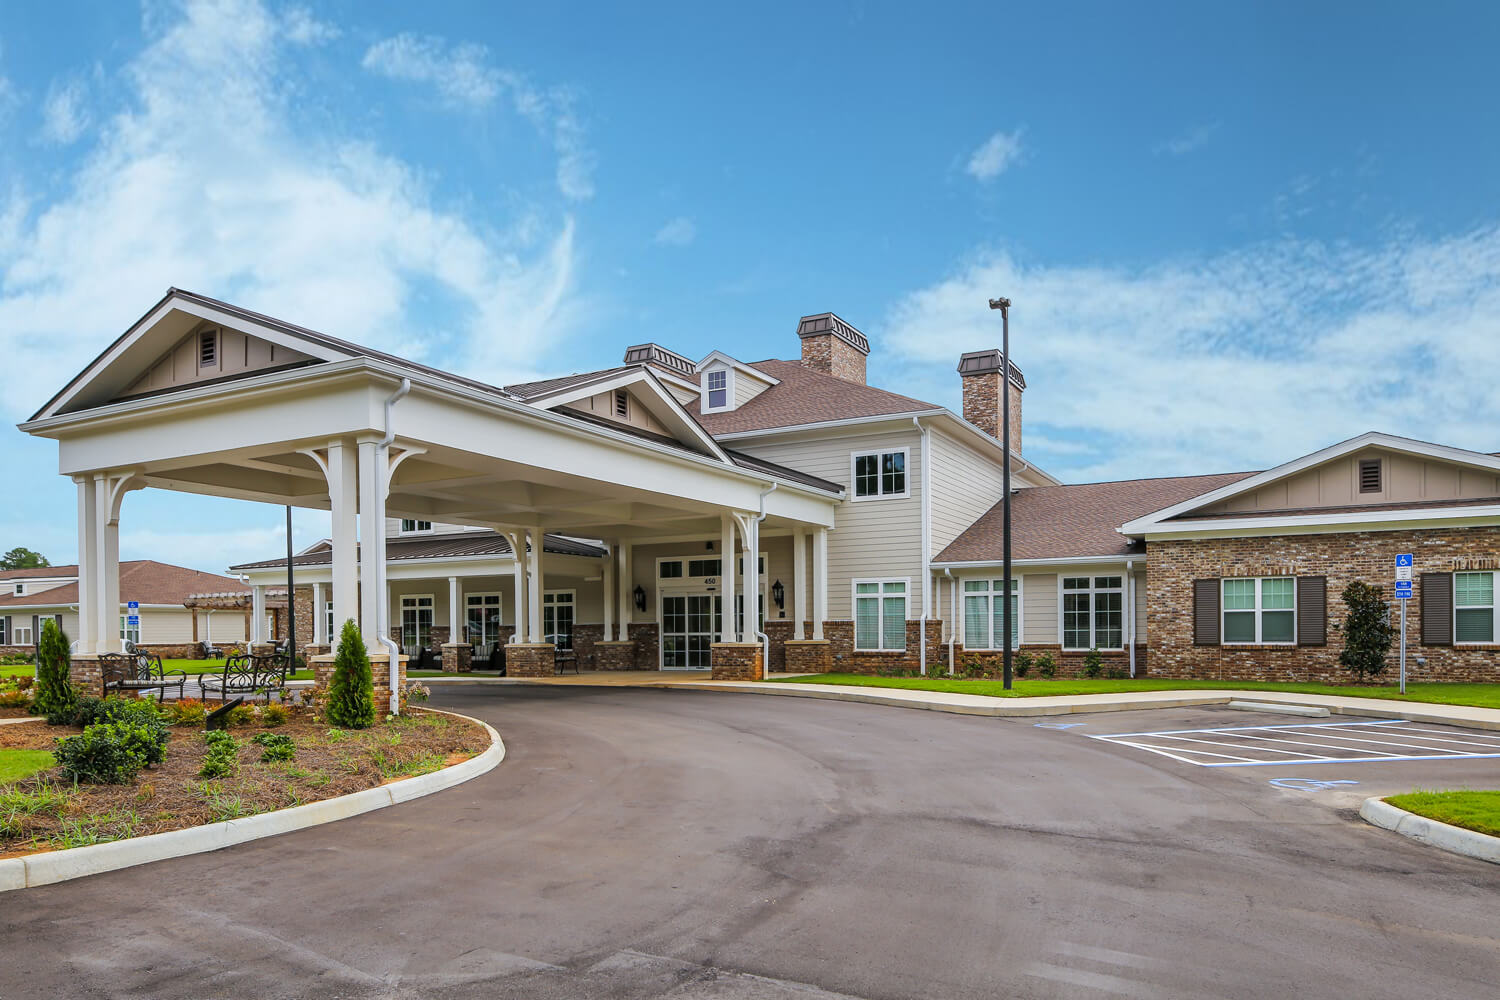 Grand South Senior Living - Covered Drop Off - Designed by Foshee Architecture